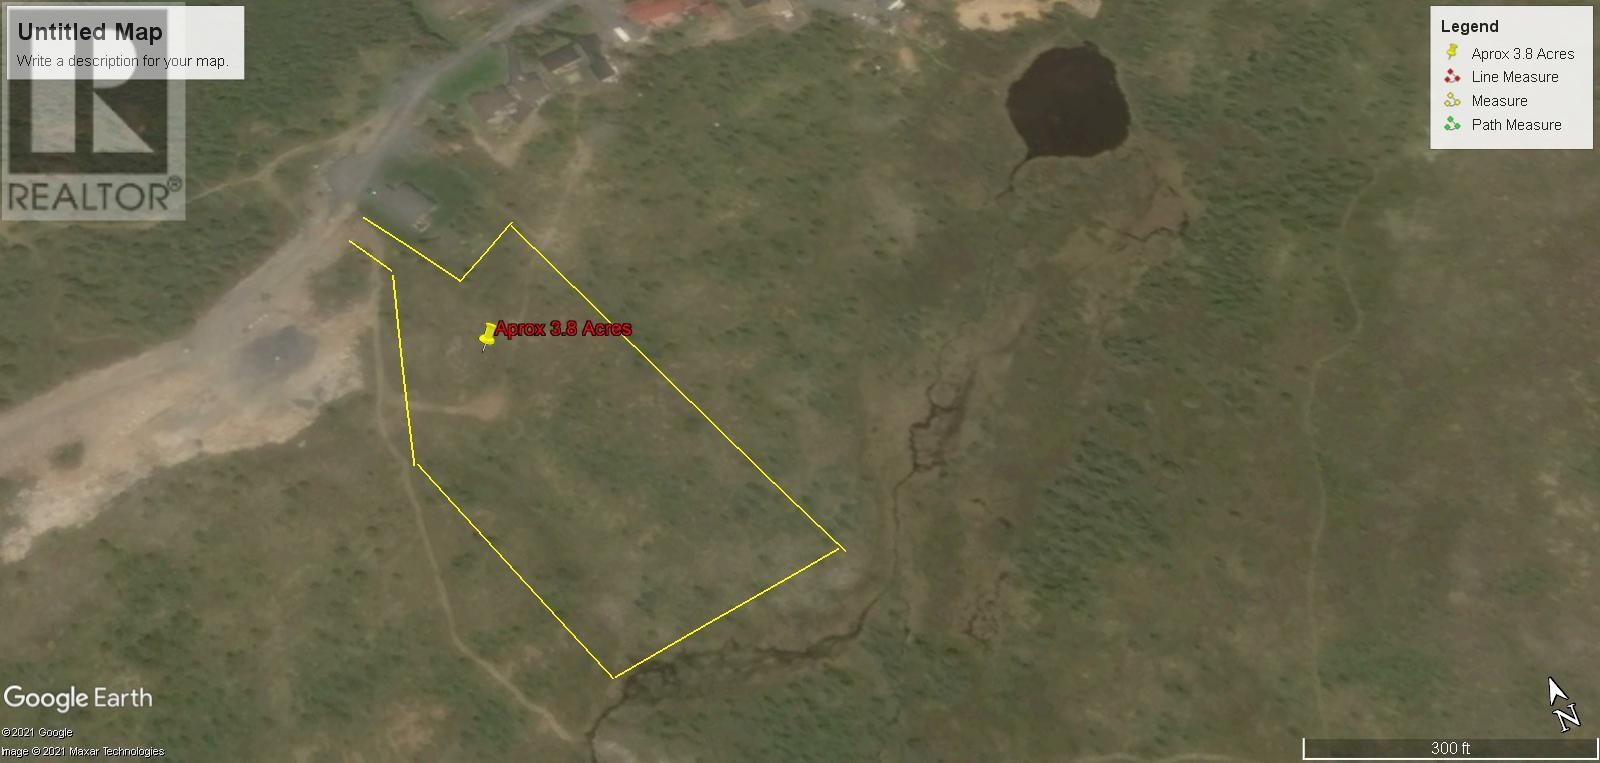 Vacant Land For Sale | 97 A Chipmans Road | Spaniard S Bay | A0A3X0